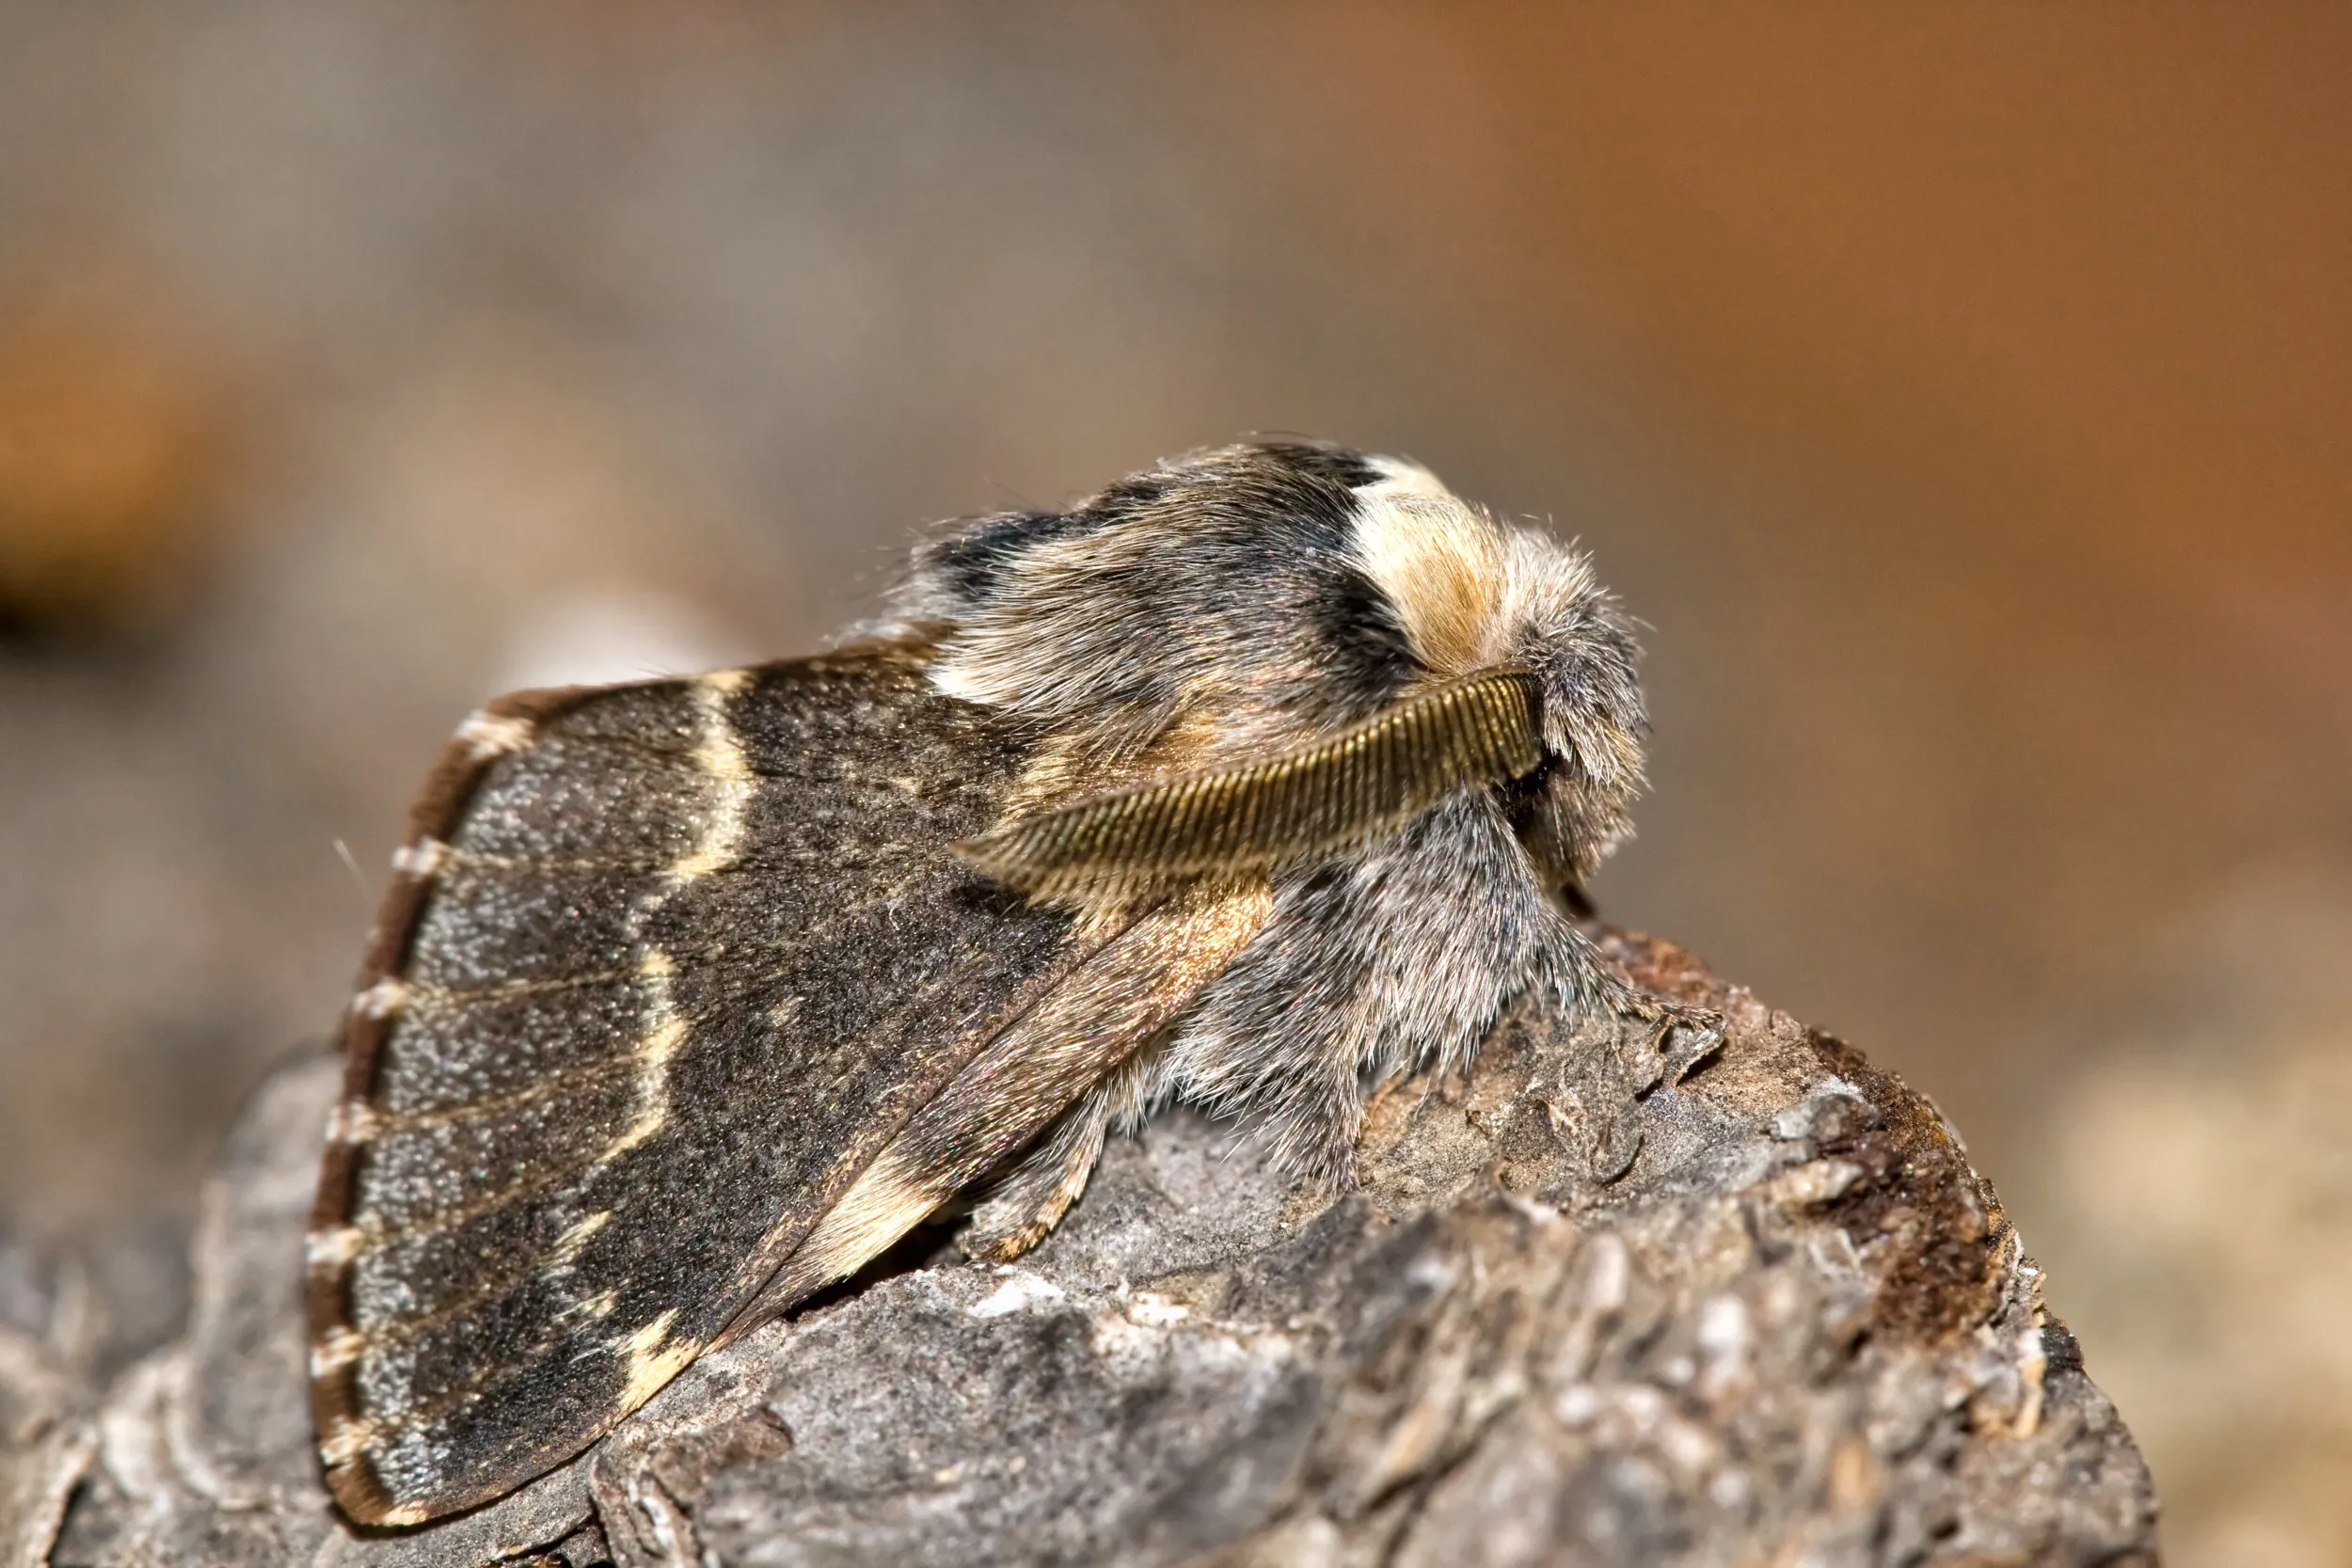 A December Moth, camouflaged against the grey-brown of a tree stump